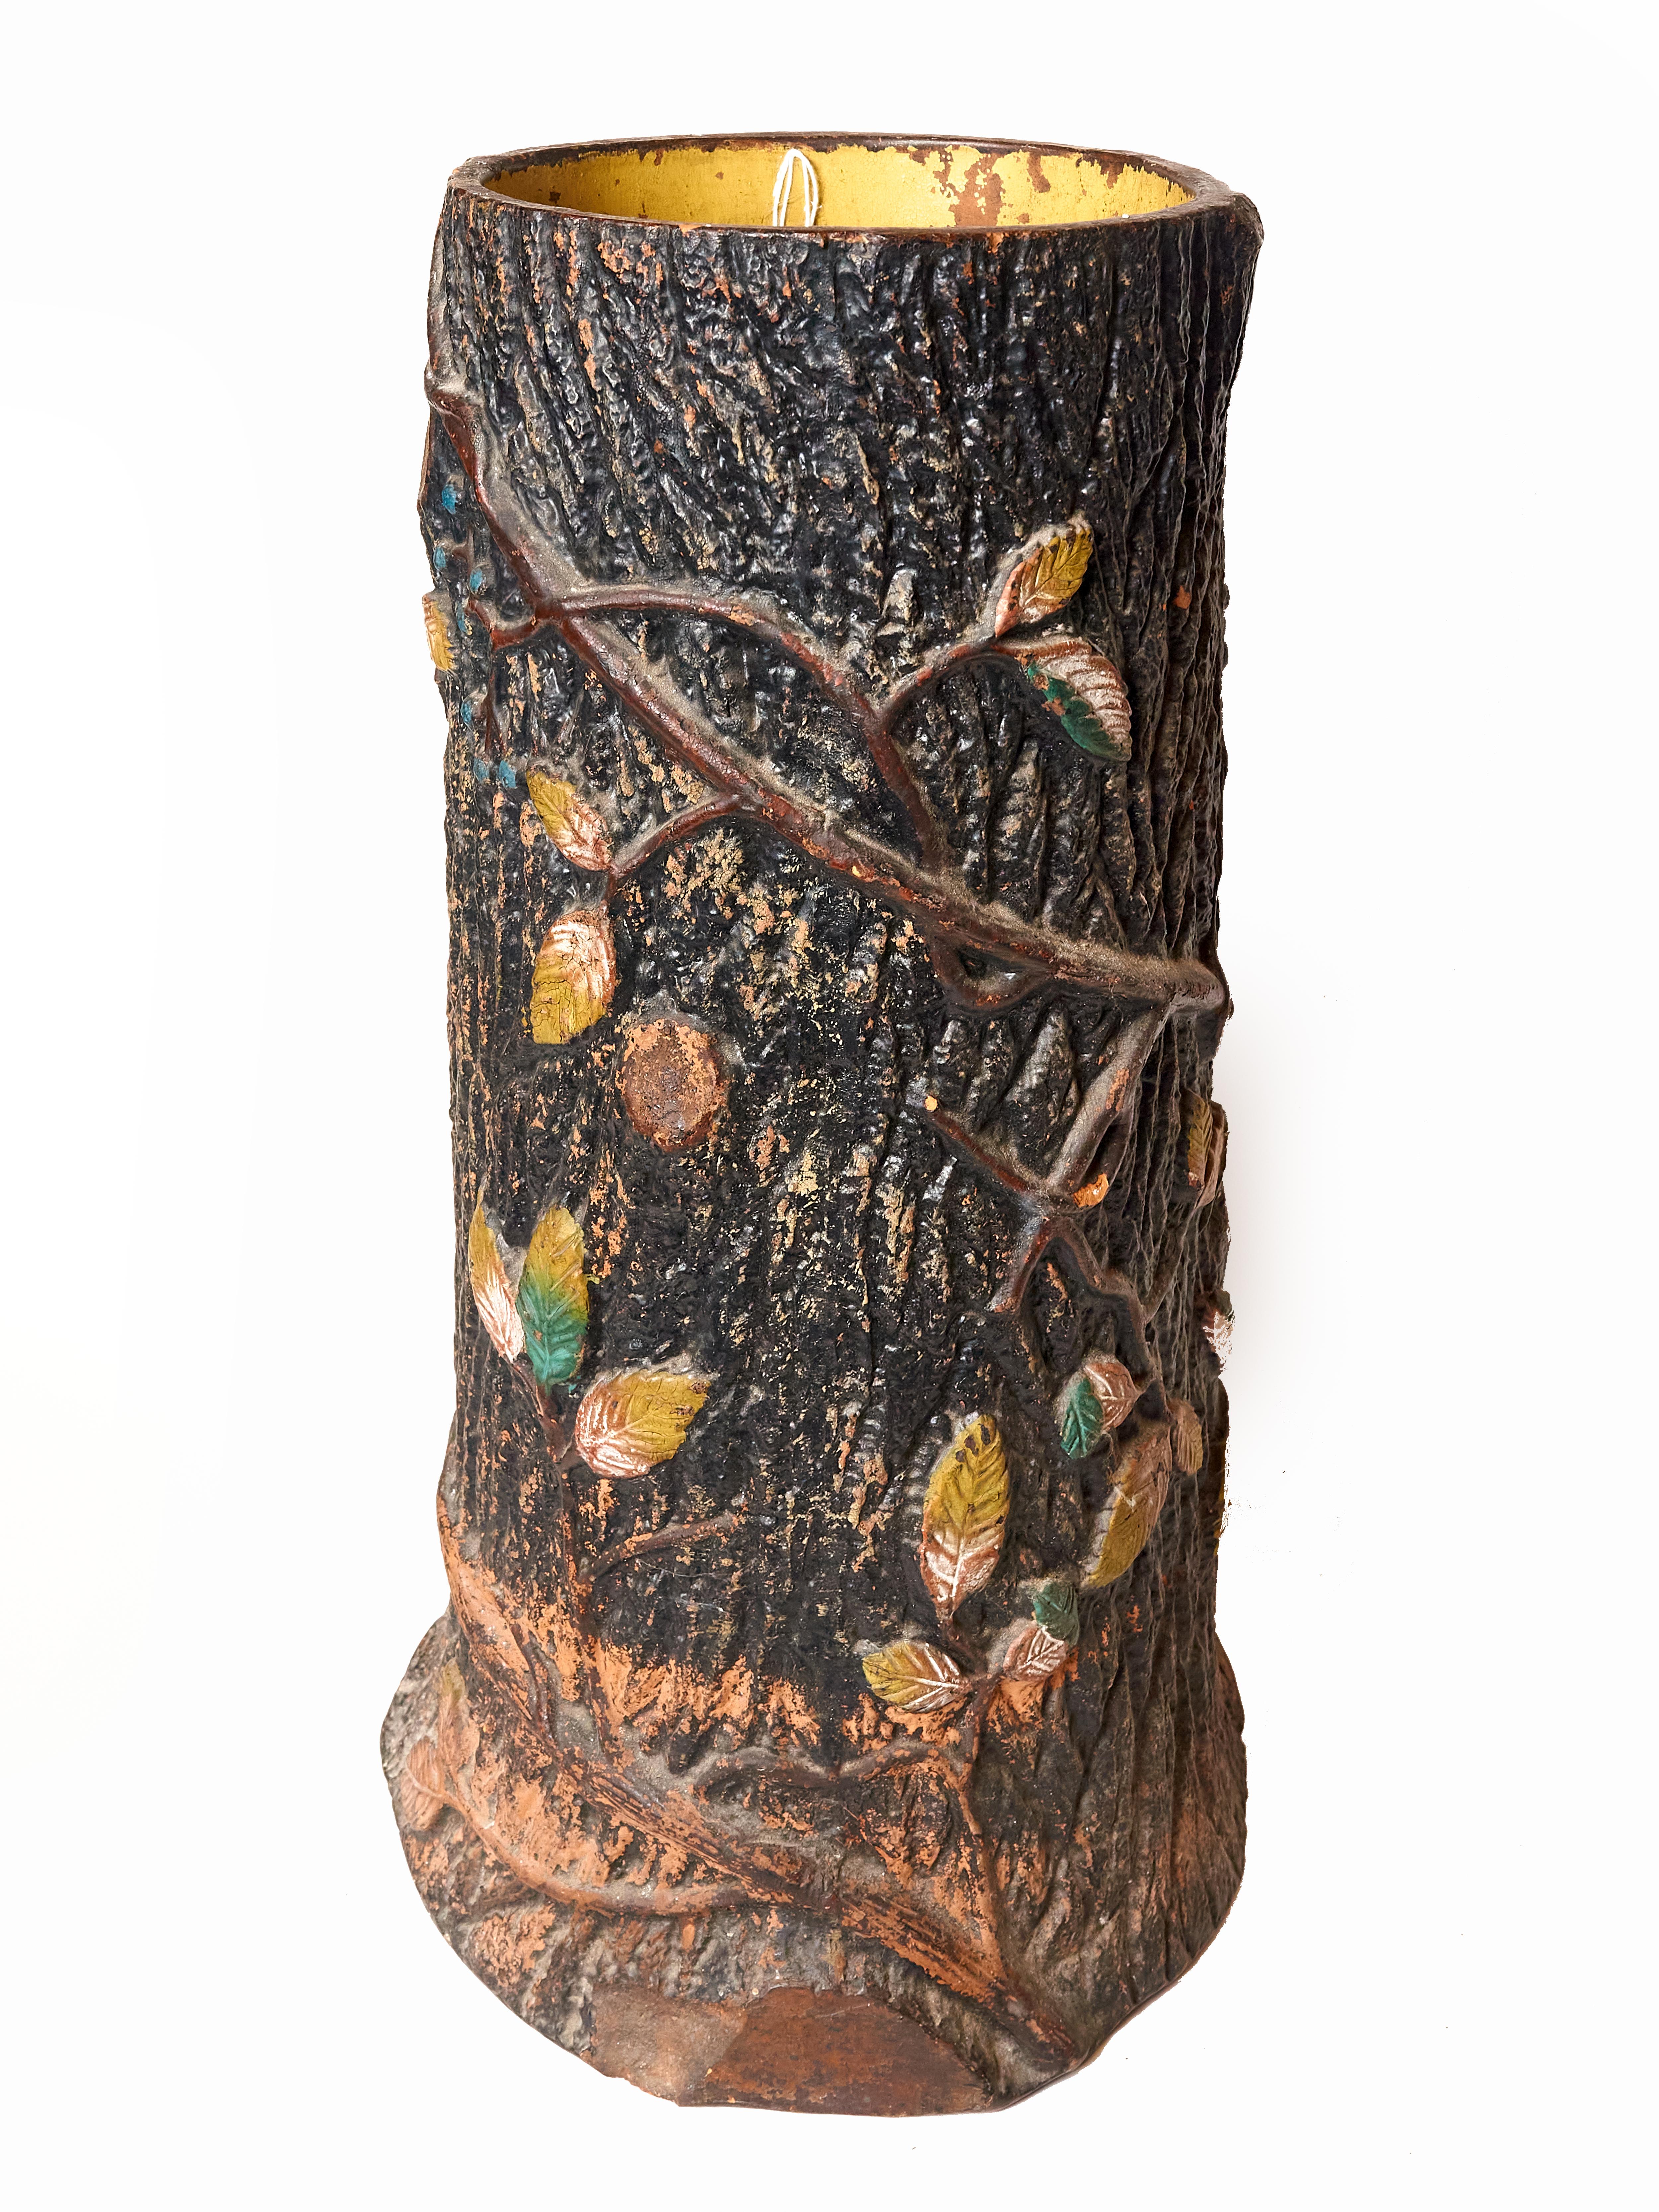 Unusual and rare red clay pottery umbrella stand circa 1930s believed to have been made in England. Fashioned to look like a tree stump with climbing vines and leaves. There are small scattered losses to the paint but no cracks or chips. The inside